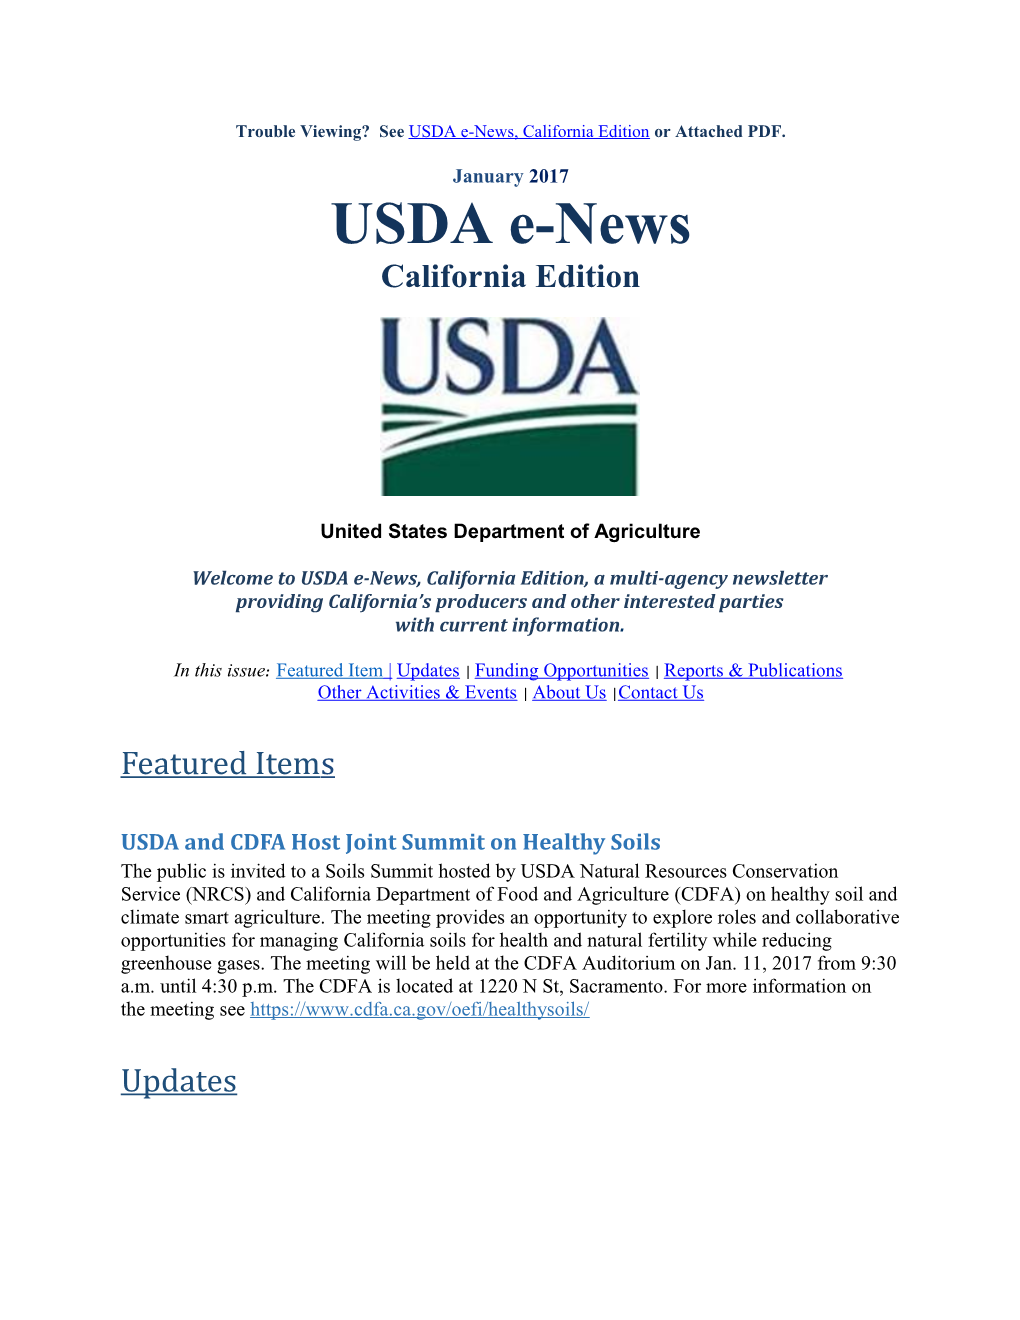 Trouble Viewing? See USDA E-News, California Edition Or Attached PDF